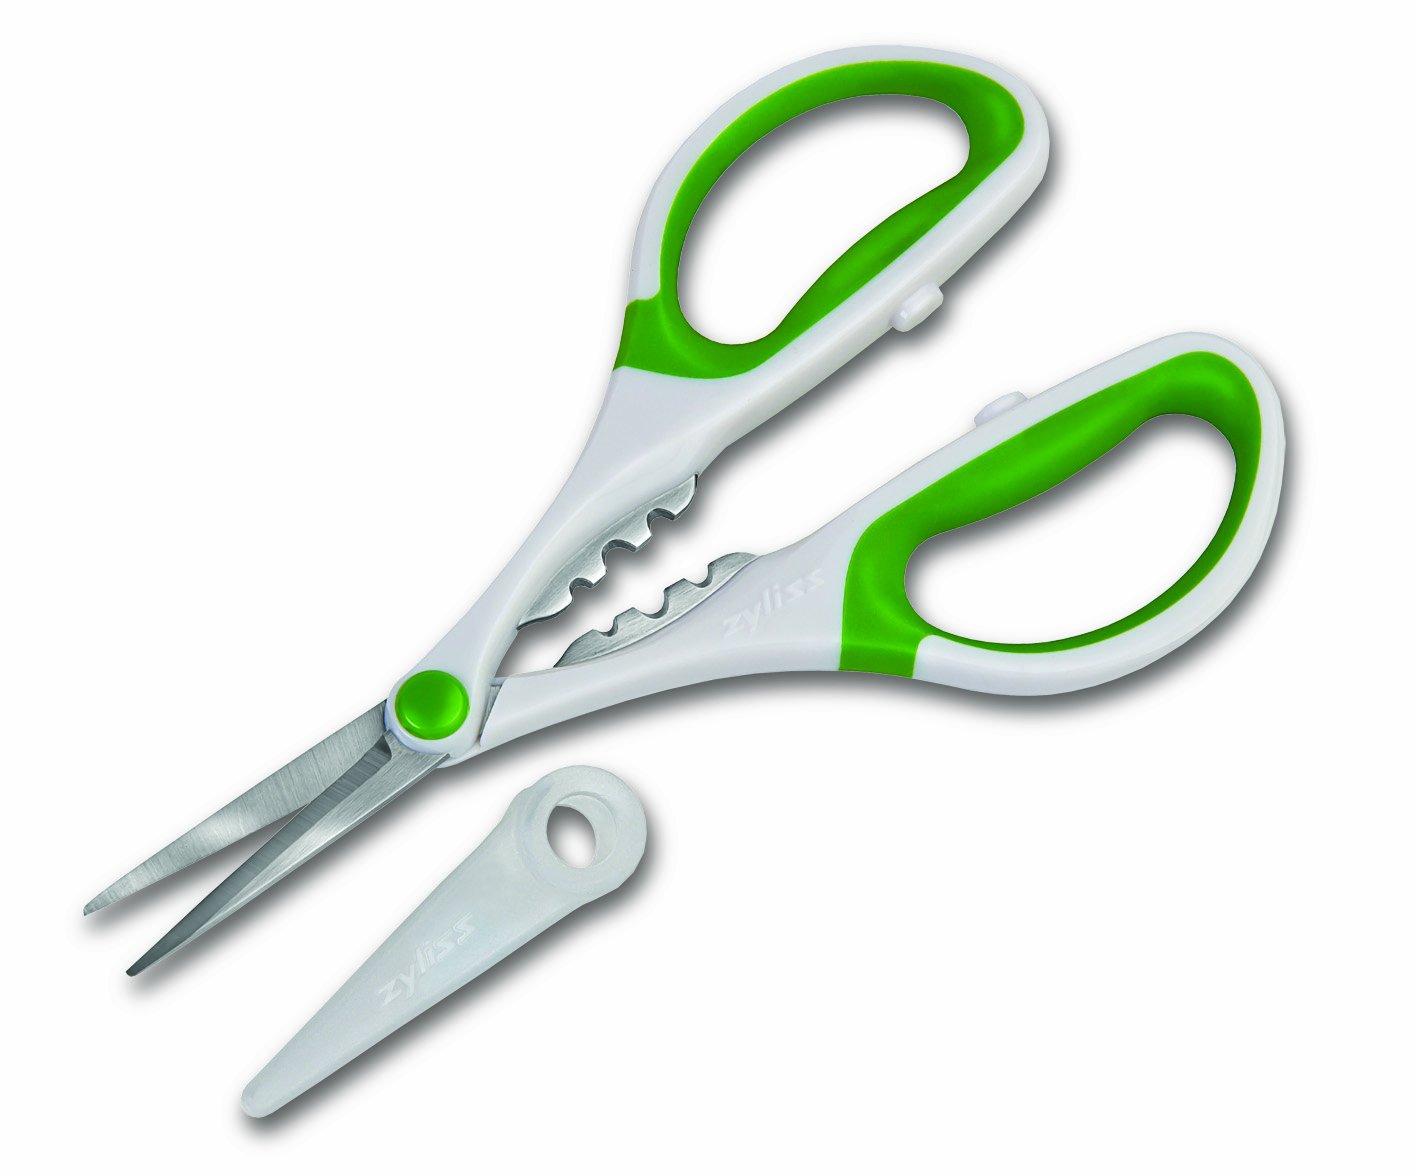 ZYLISS Herb Scissors – Trimming Weeds and Flower Buds